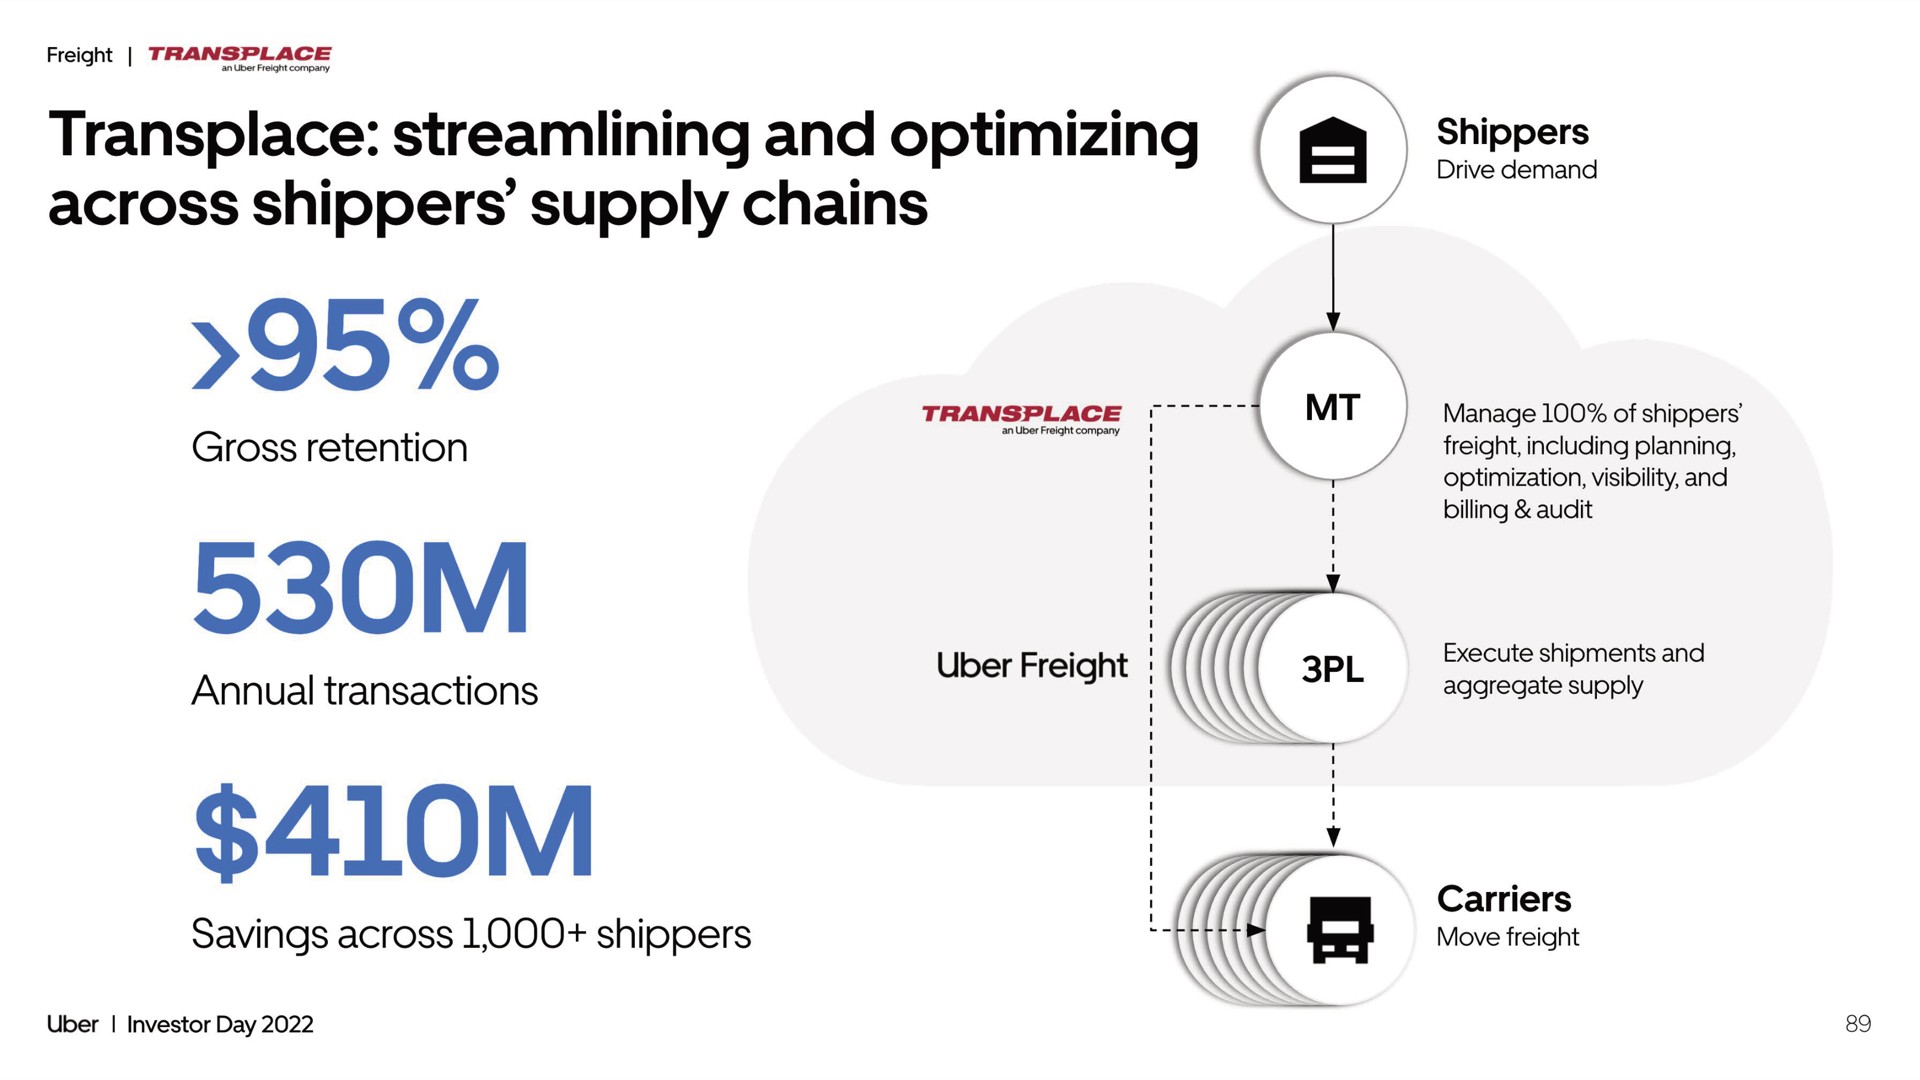 transplace streamlining and optimizing across shippers supply chains freight | Uber